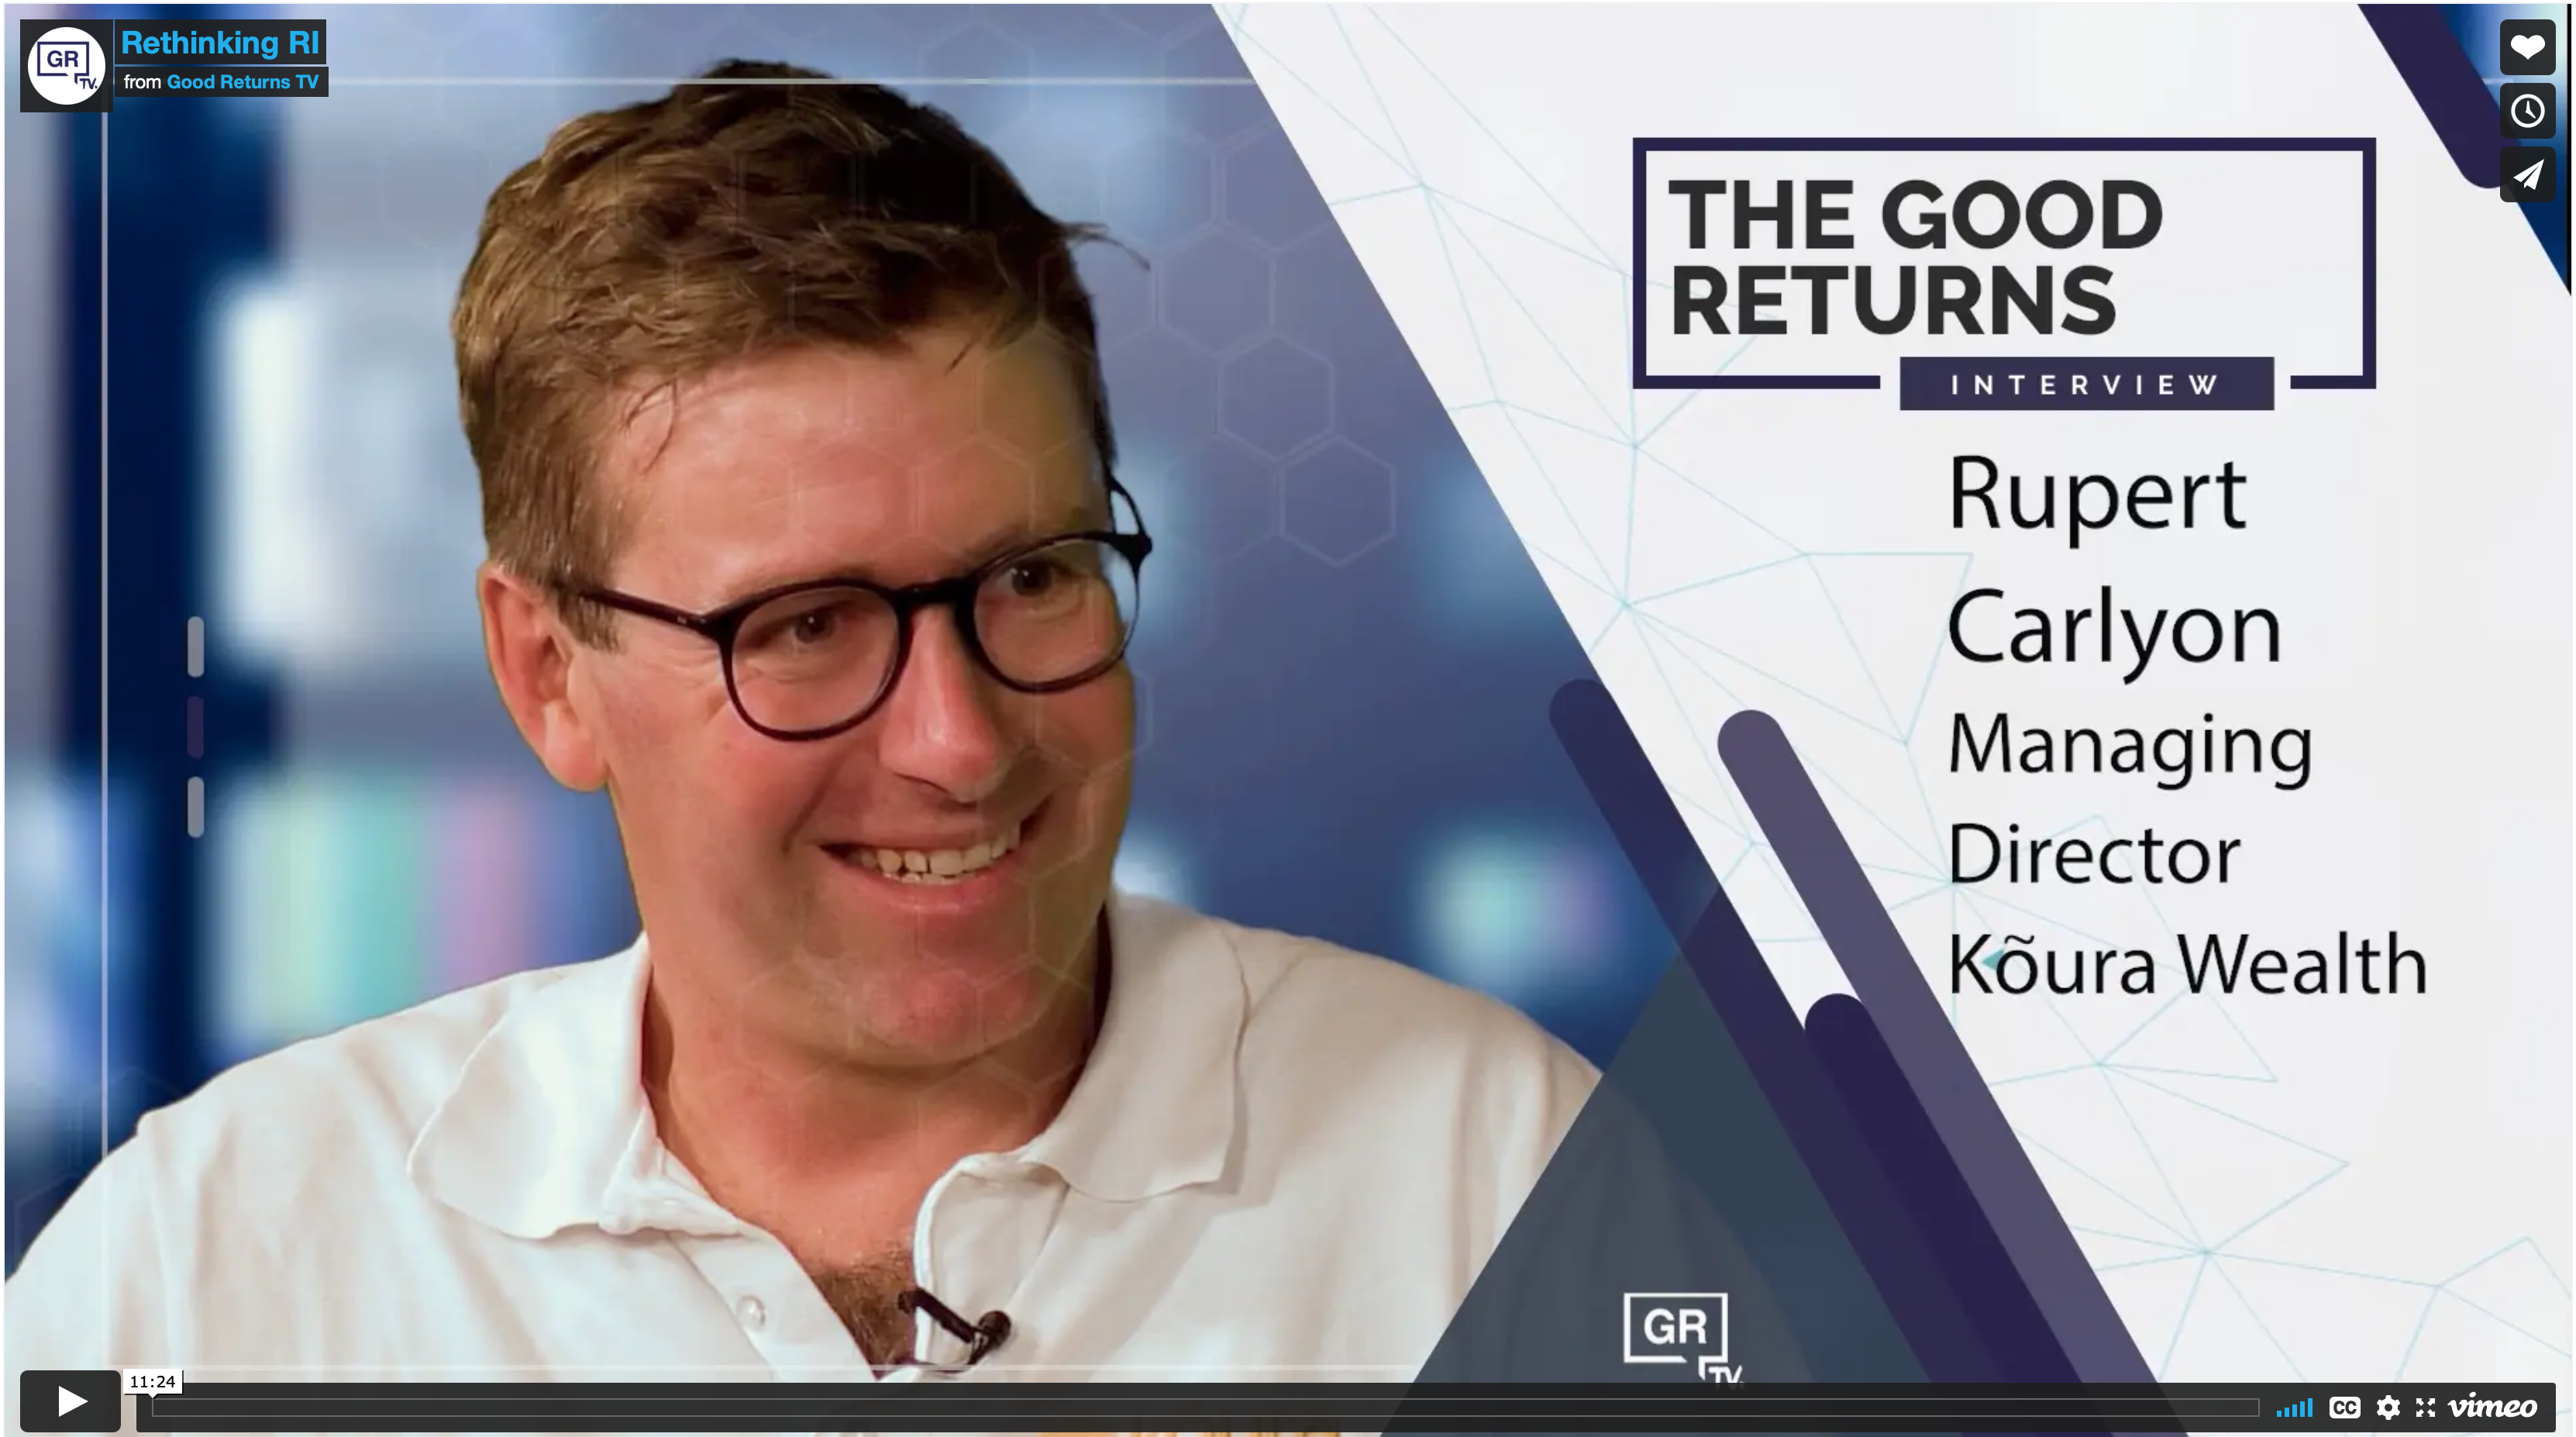 [GRTV] It's time to rethink responsible investing